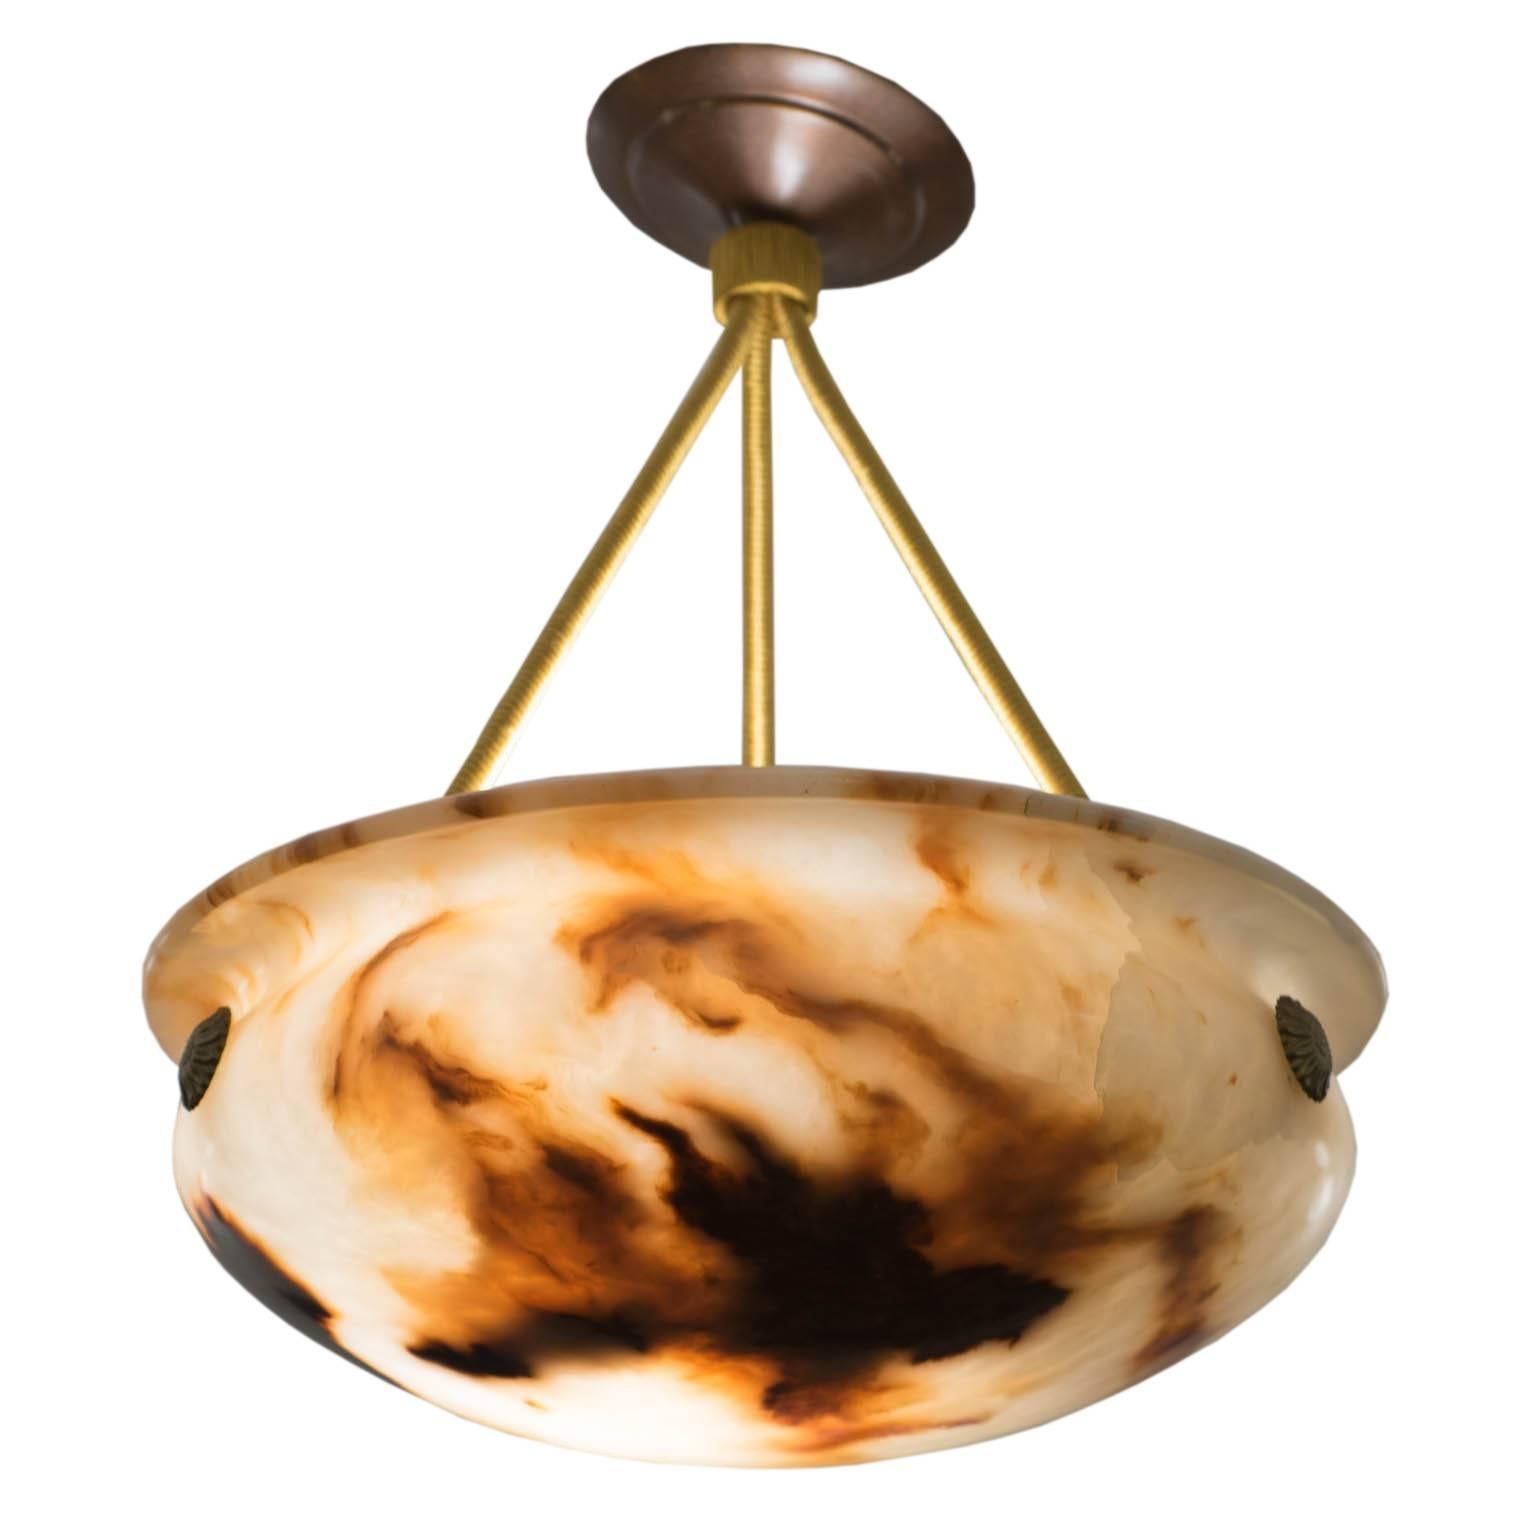 This type of alabaster is rarely seen and exists only in antique pieces. The creamy, curved bowl is swirled with warm clay-toned mineral deposits and has been polished to a high gloss. Original bronze medallions anchor the electrified ropes to the